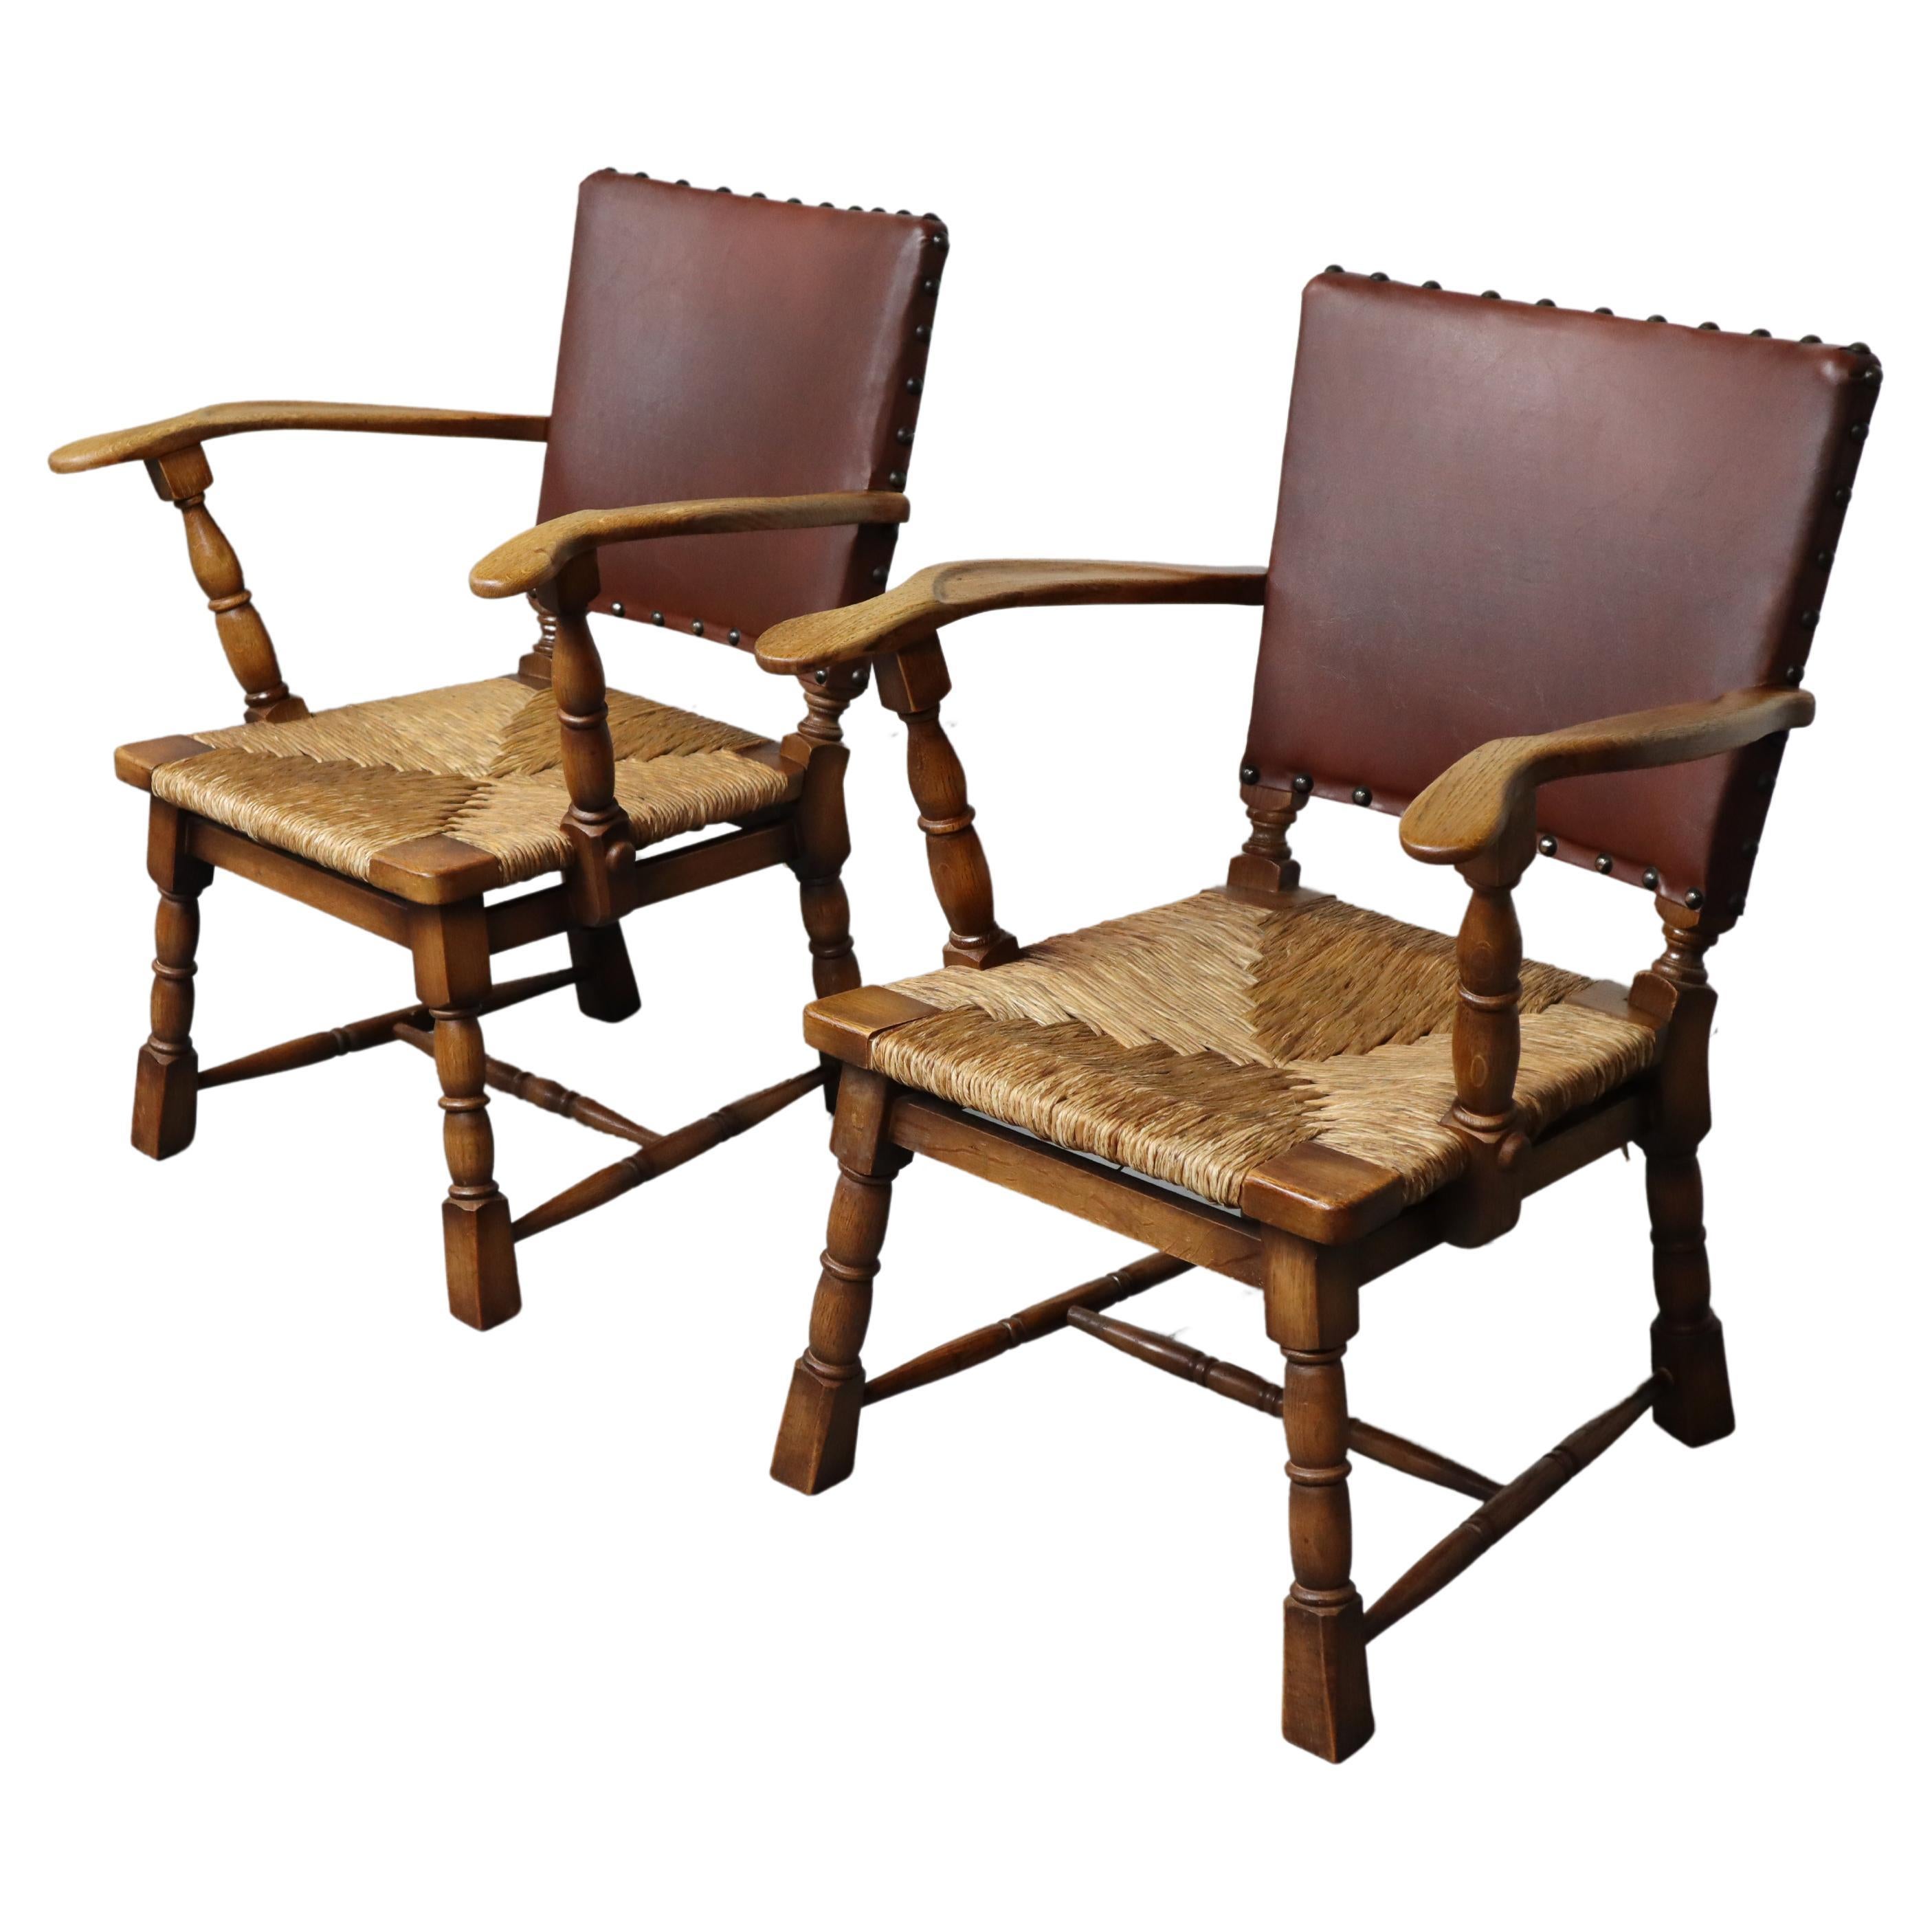 Pair of rush and oak armchairs by De Ster Gelderland, Netherlands 1950's. For Sale